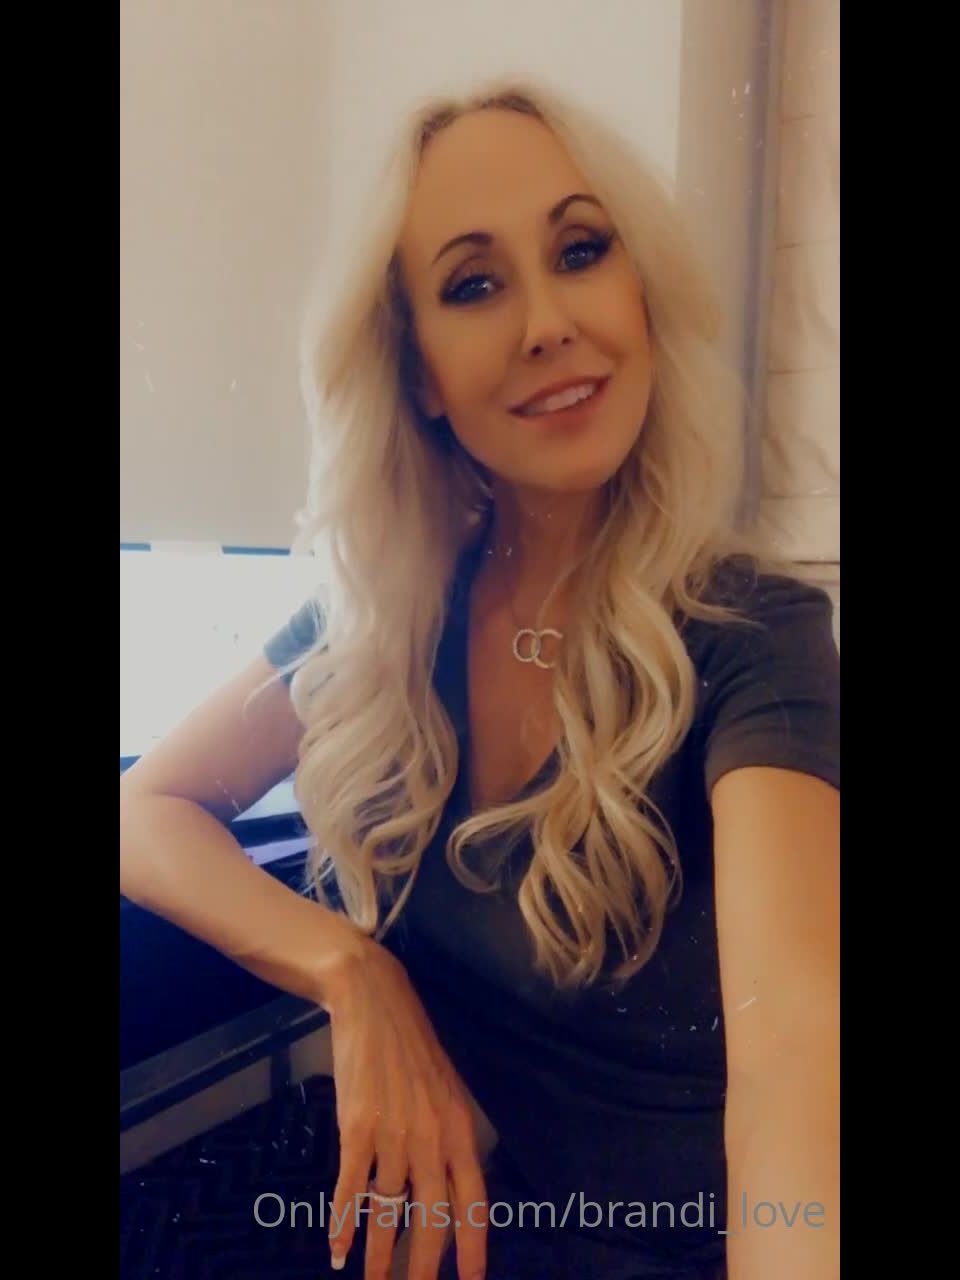 Brandi Love () Brandilove - what im doing as we speak spoil me to get me out of this new dress and into your dms 25-09-2021